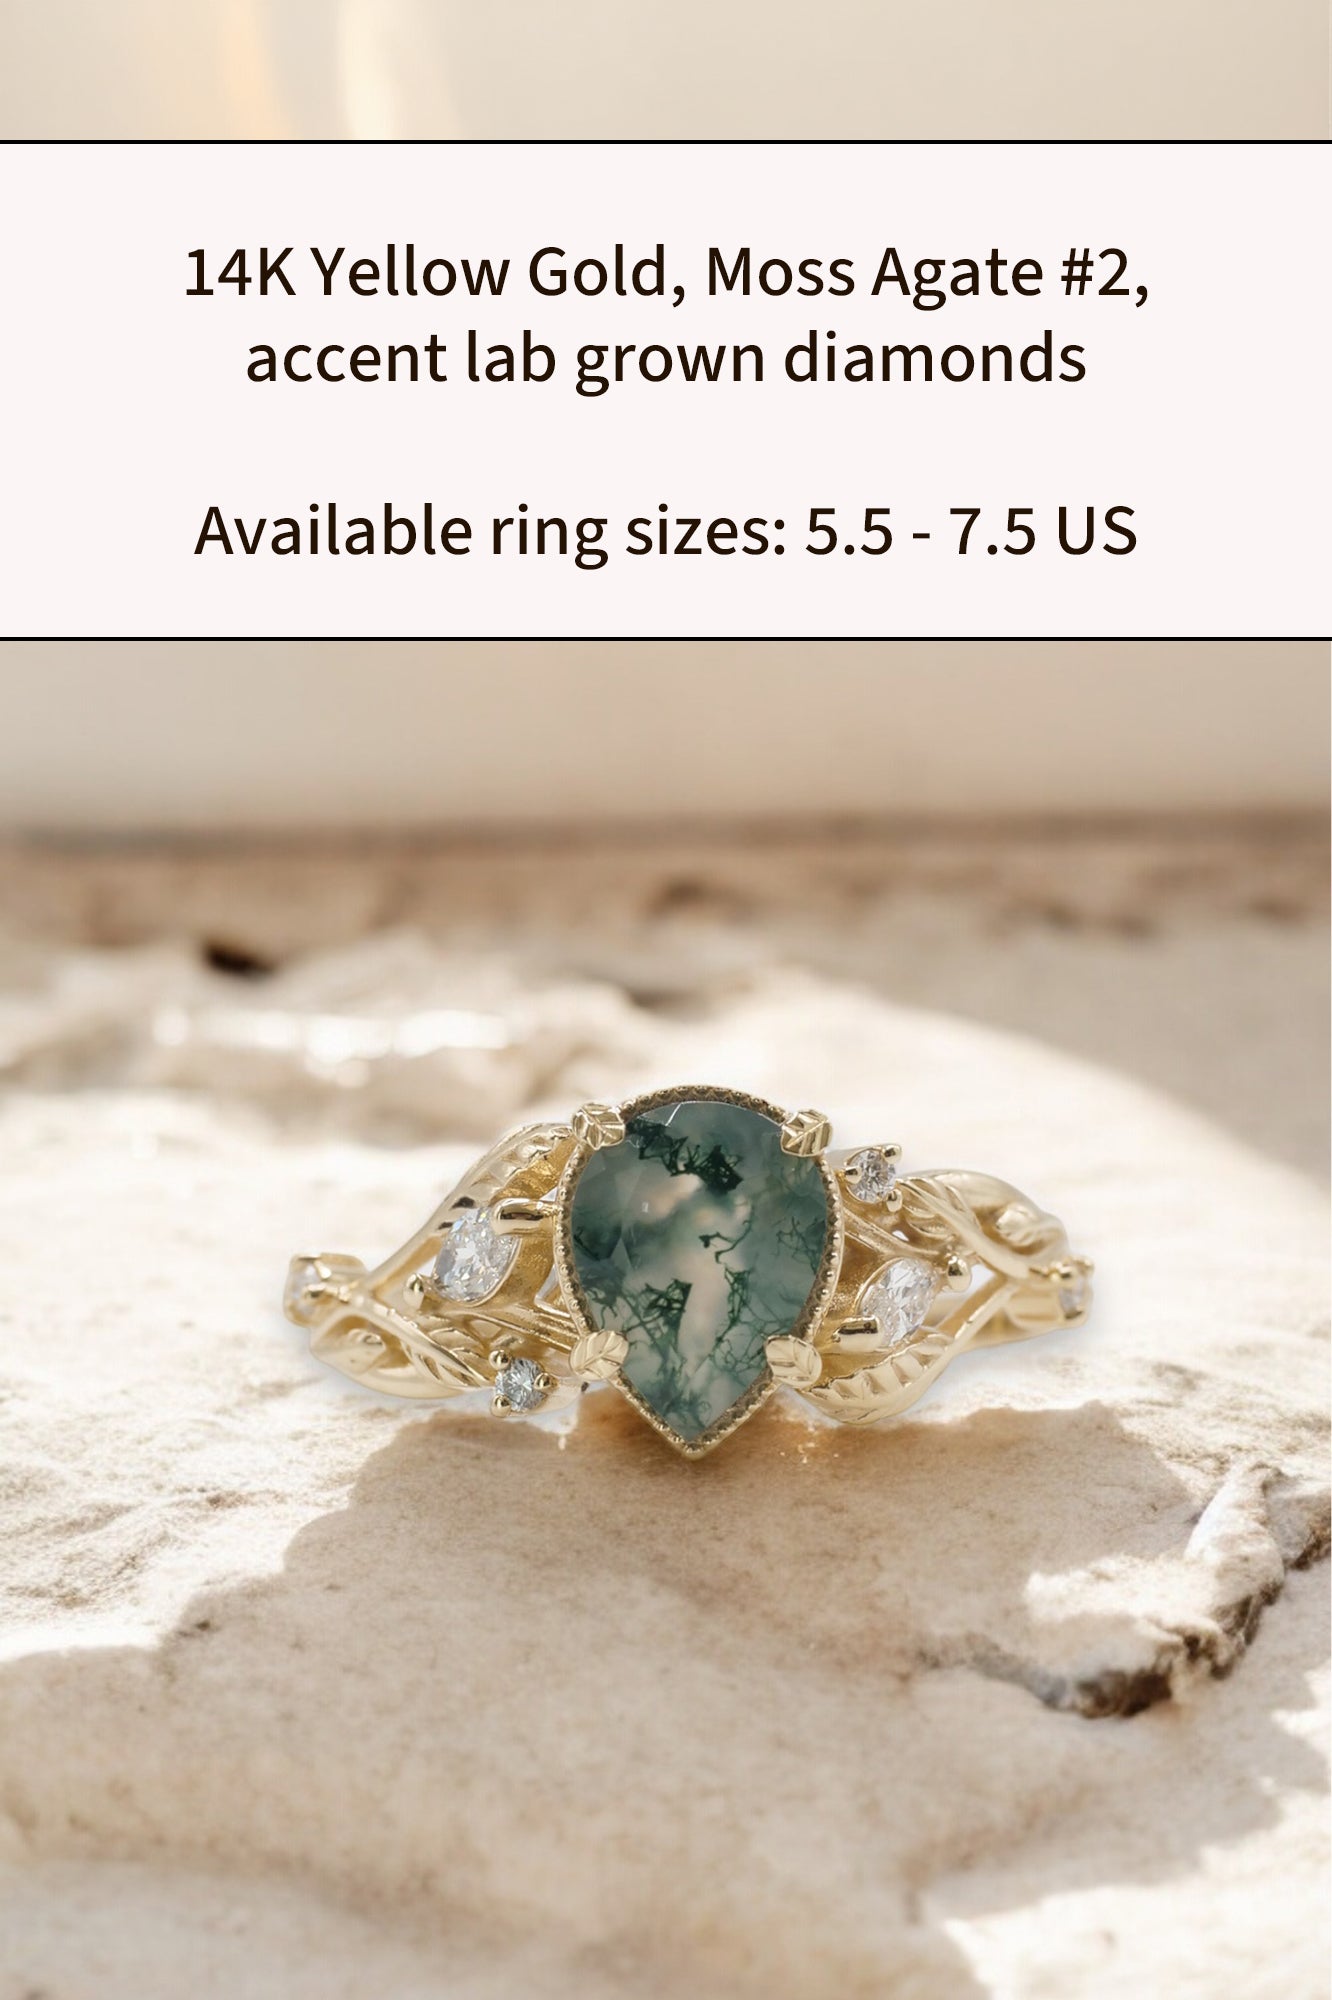 READY TO SHIP: Patricia ring in 14K or 18K yellow gold, natural moss agate pear cut 8x6 mm, accent lab grown diamonds, AVAILABLE RING SIZES: 5.5-10 US